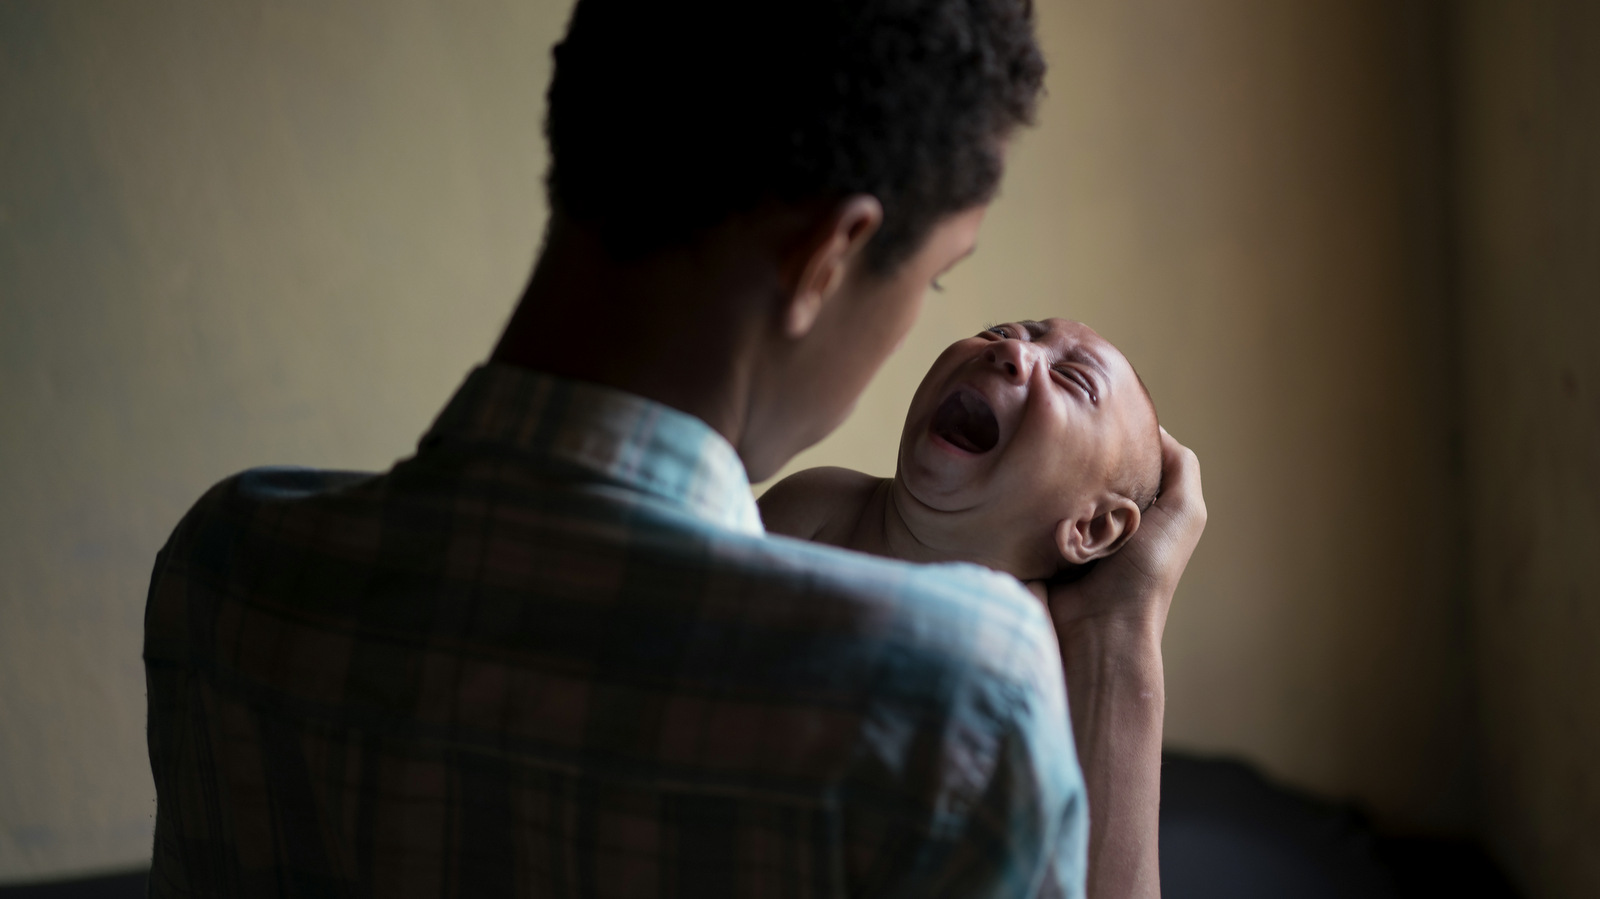 Elielson tries to calm down his baby brother Jose Wesley, in Bonito, Pernambuco state, Brazil. Jose Wesley struggles to feed, something common in children with neurological disorders like microcephaly. (AP Photo/Felipe Dana)